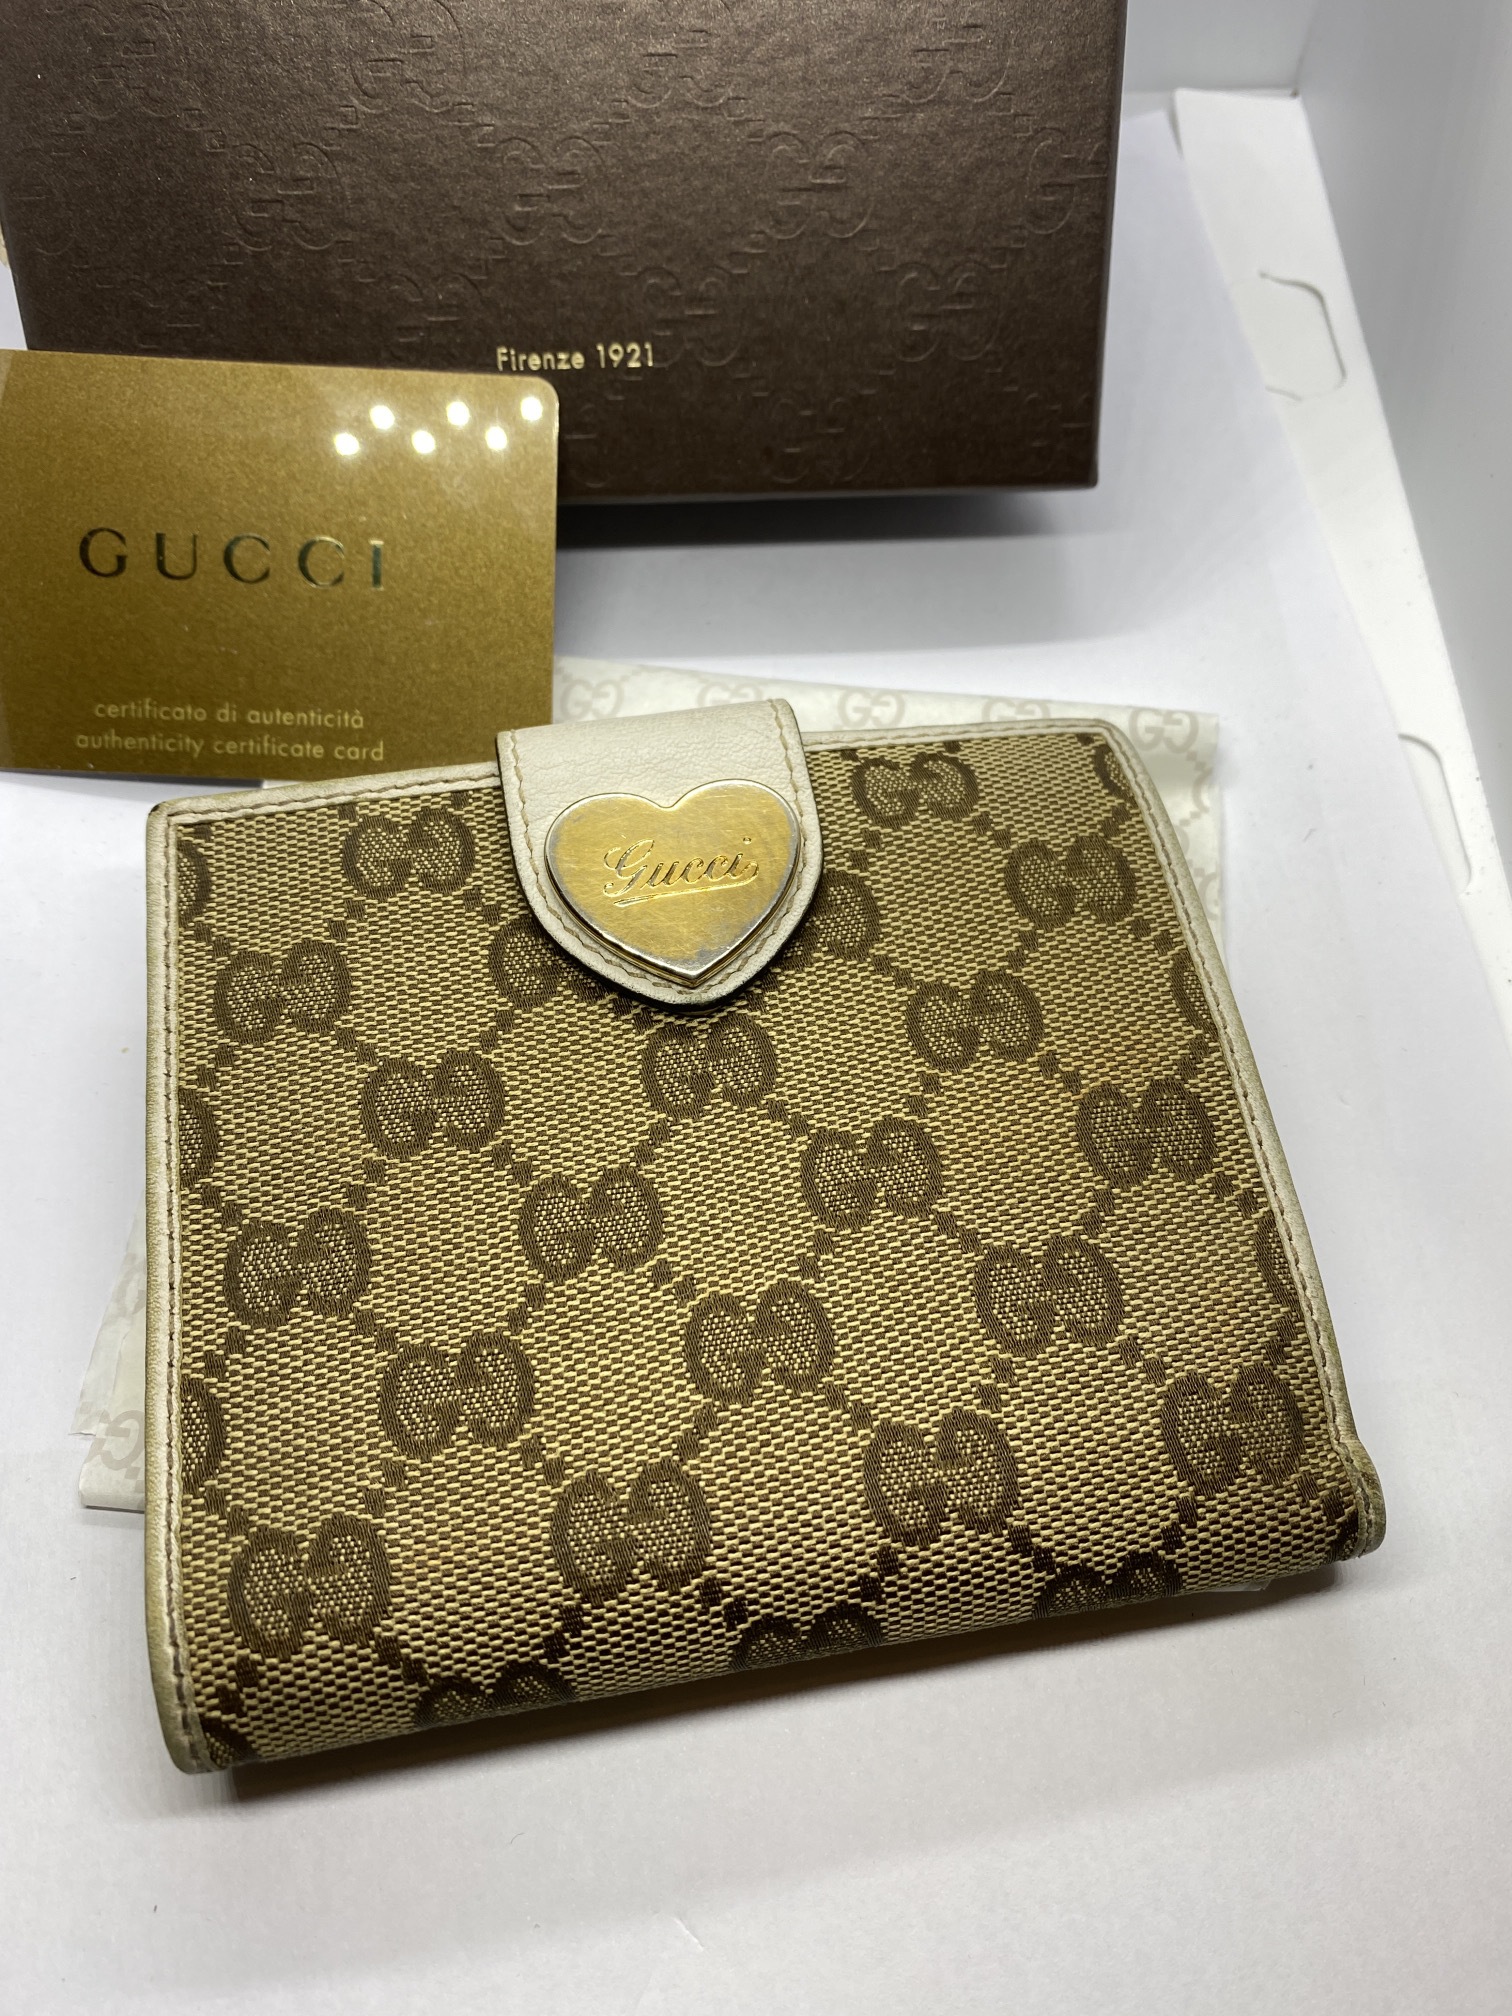 VINTAGE GUCCI GG LOGO HEART PURSE WITH BOX ETC - Image 3 of 7